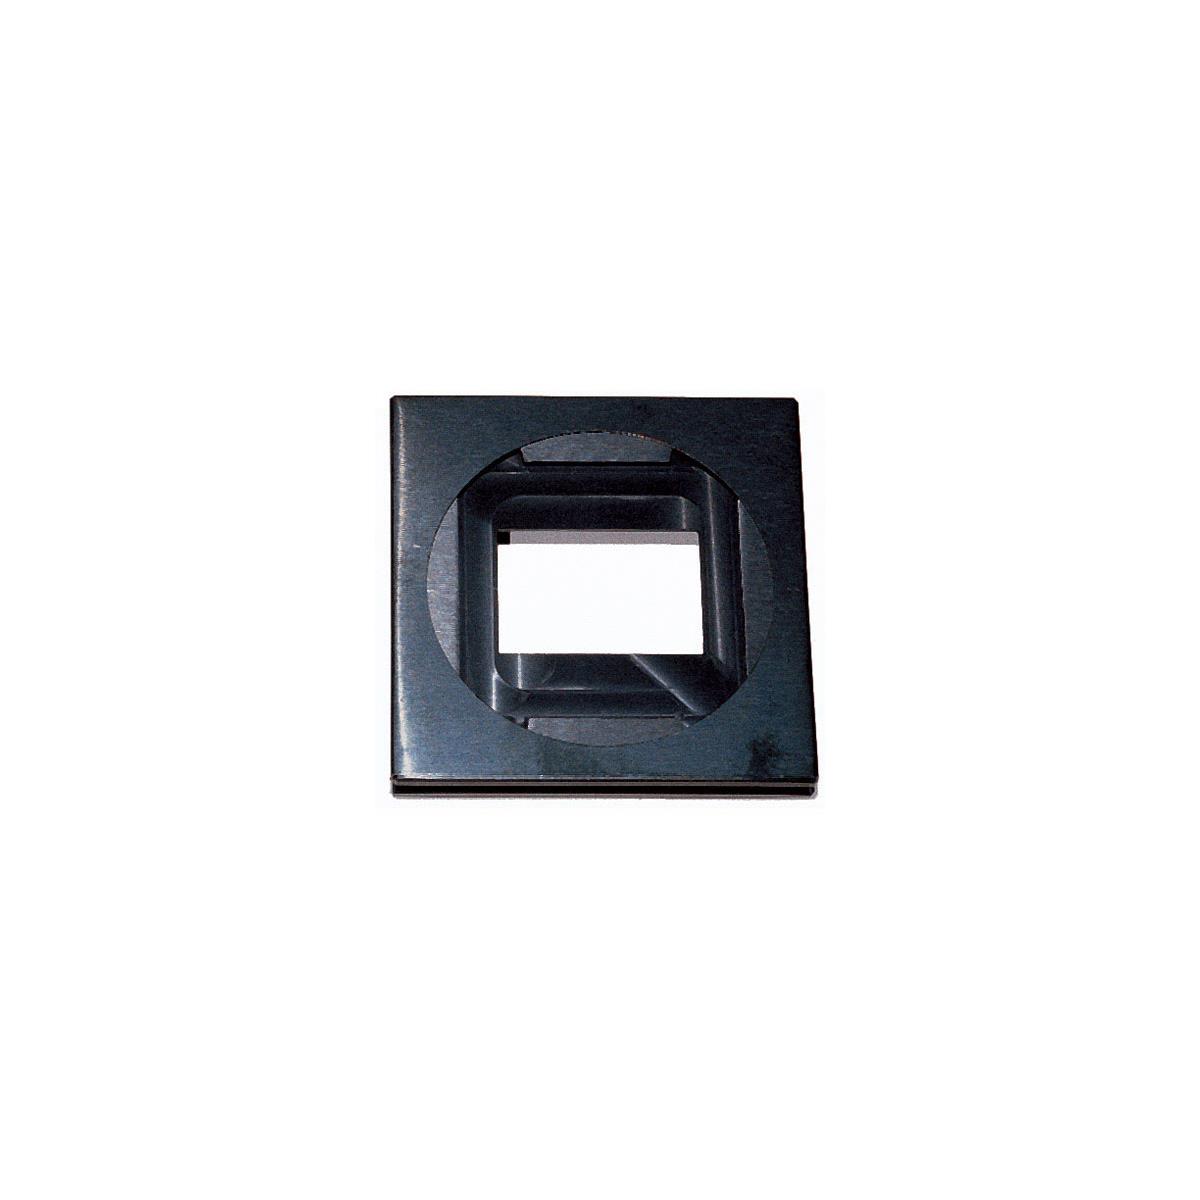 Image of Dedolight 35mm Mounted Slide Holder for DP-1 Spot Projection Attachment